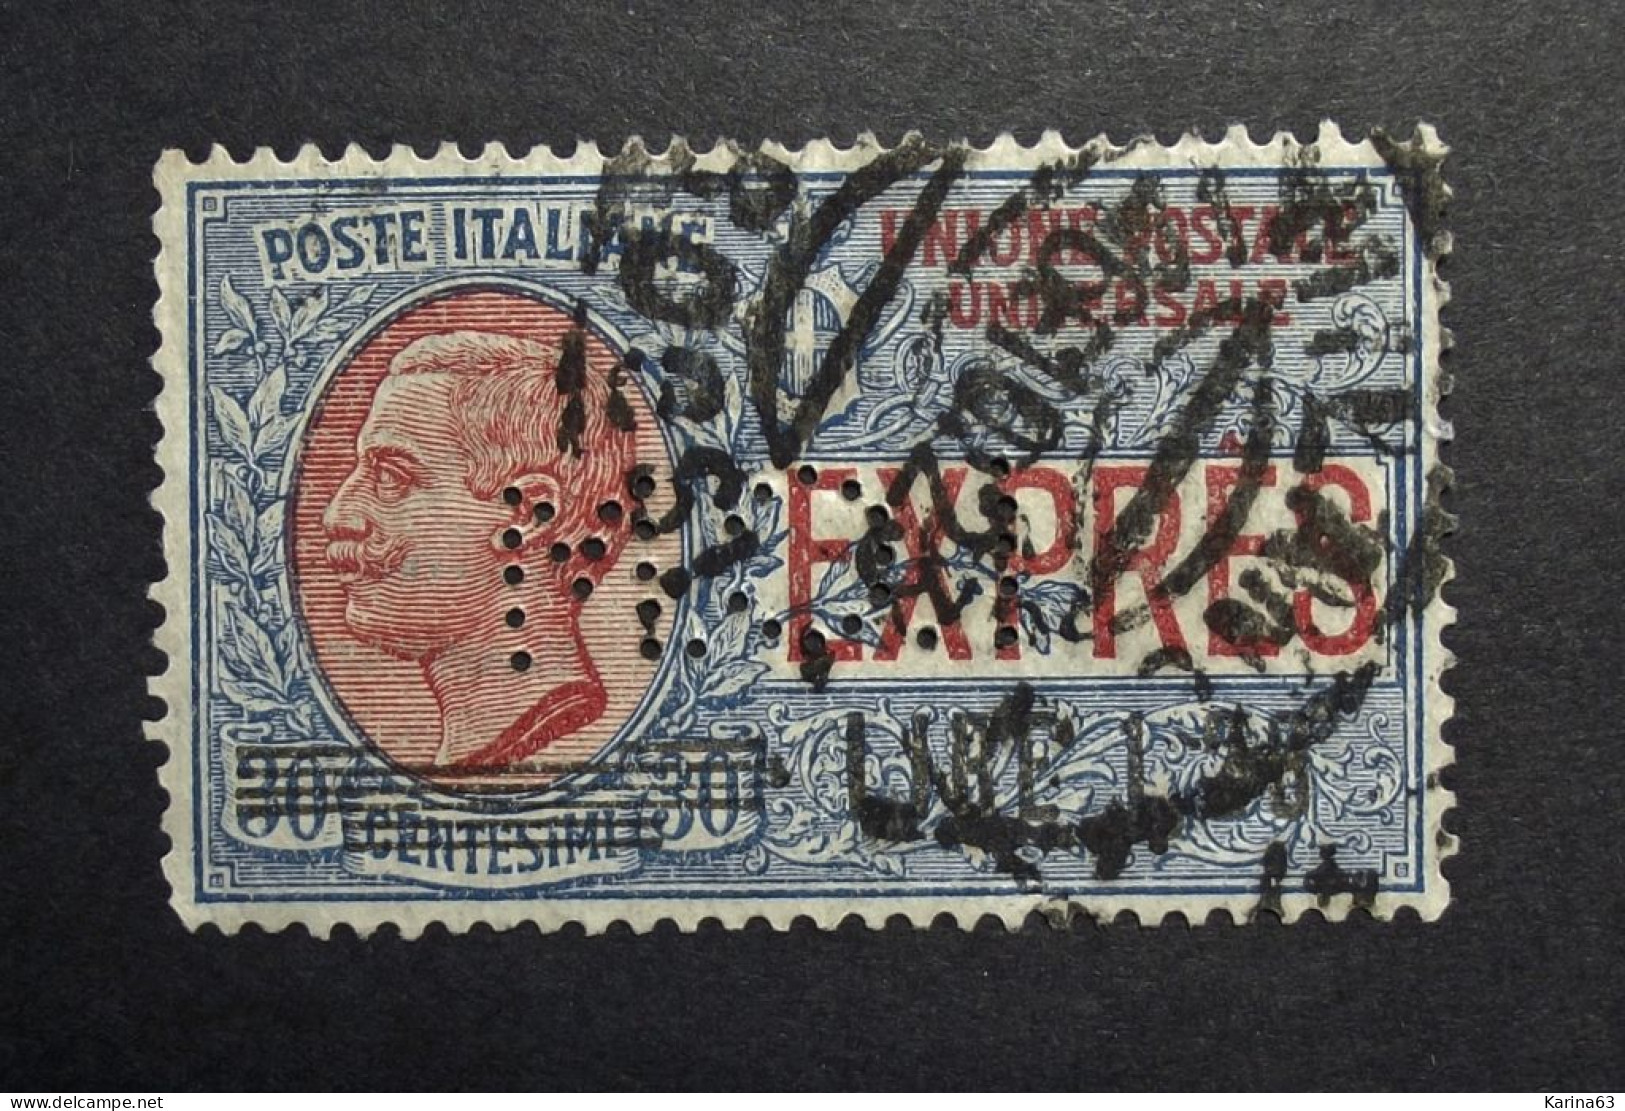 Italia - Italy -  Perfin - Lochung -  I C.M -   Istituto Credito Marittimo -  Cancelled - Poste Exprèsse